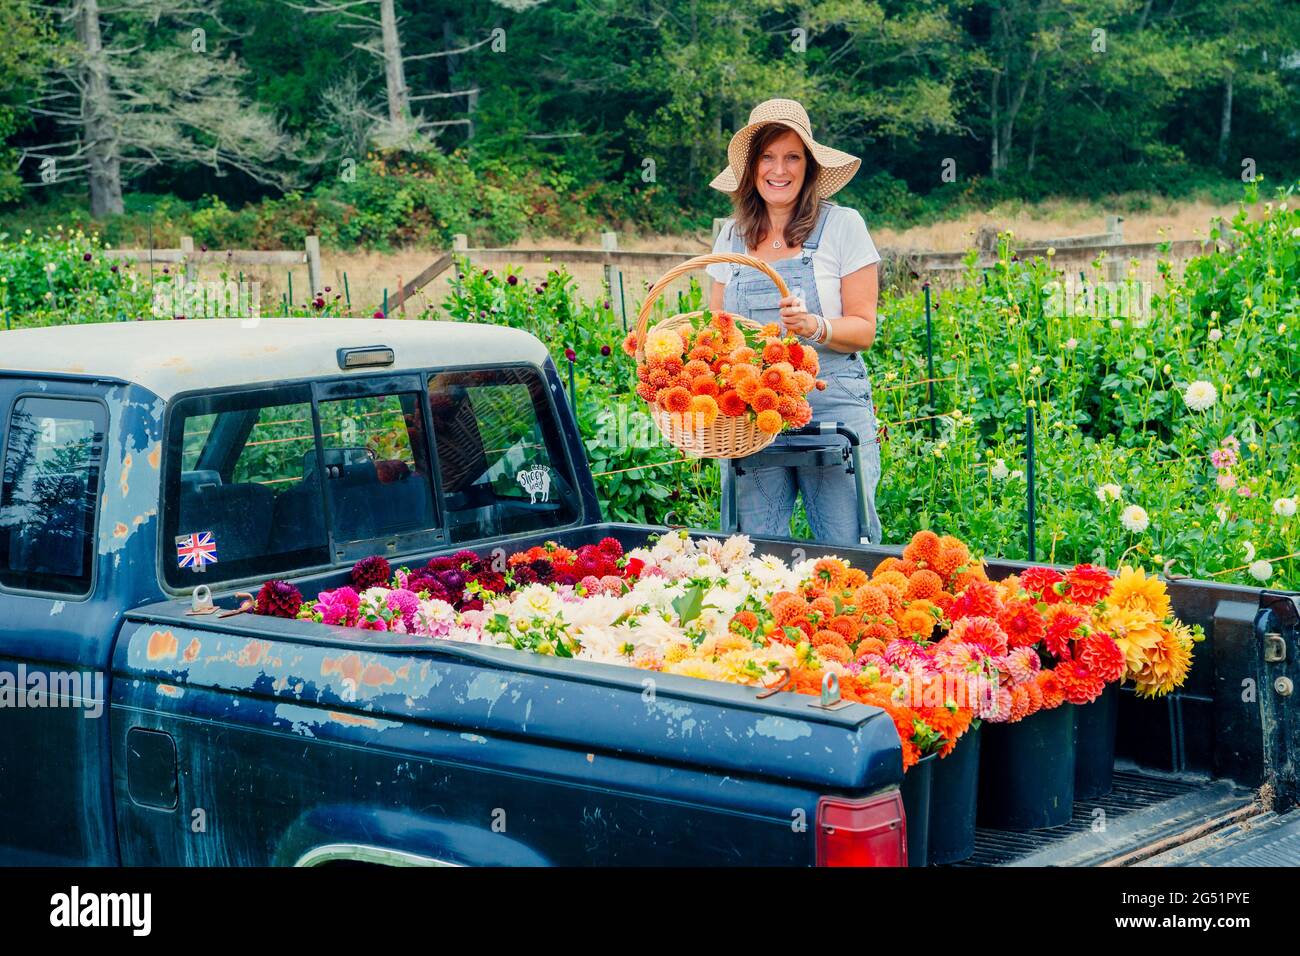 Truck bed full of Dahlia flowers and woman with basket Stock Photo